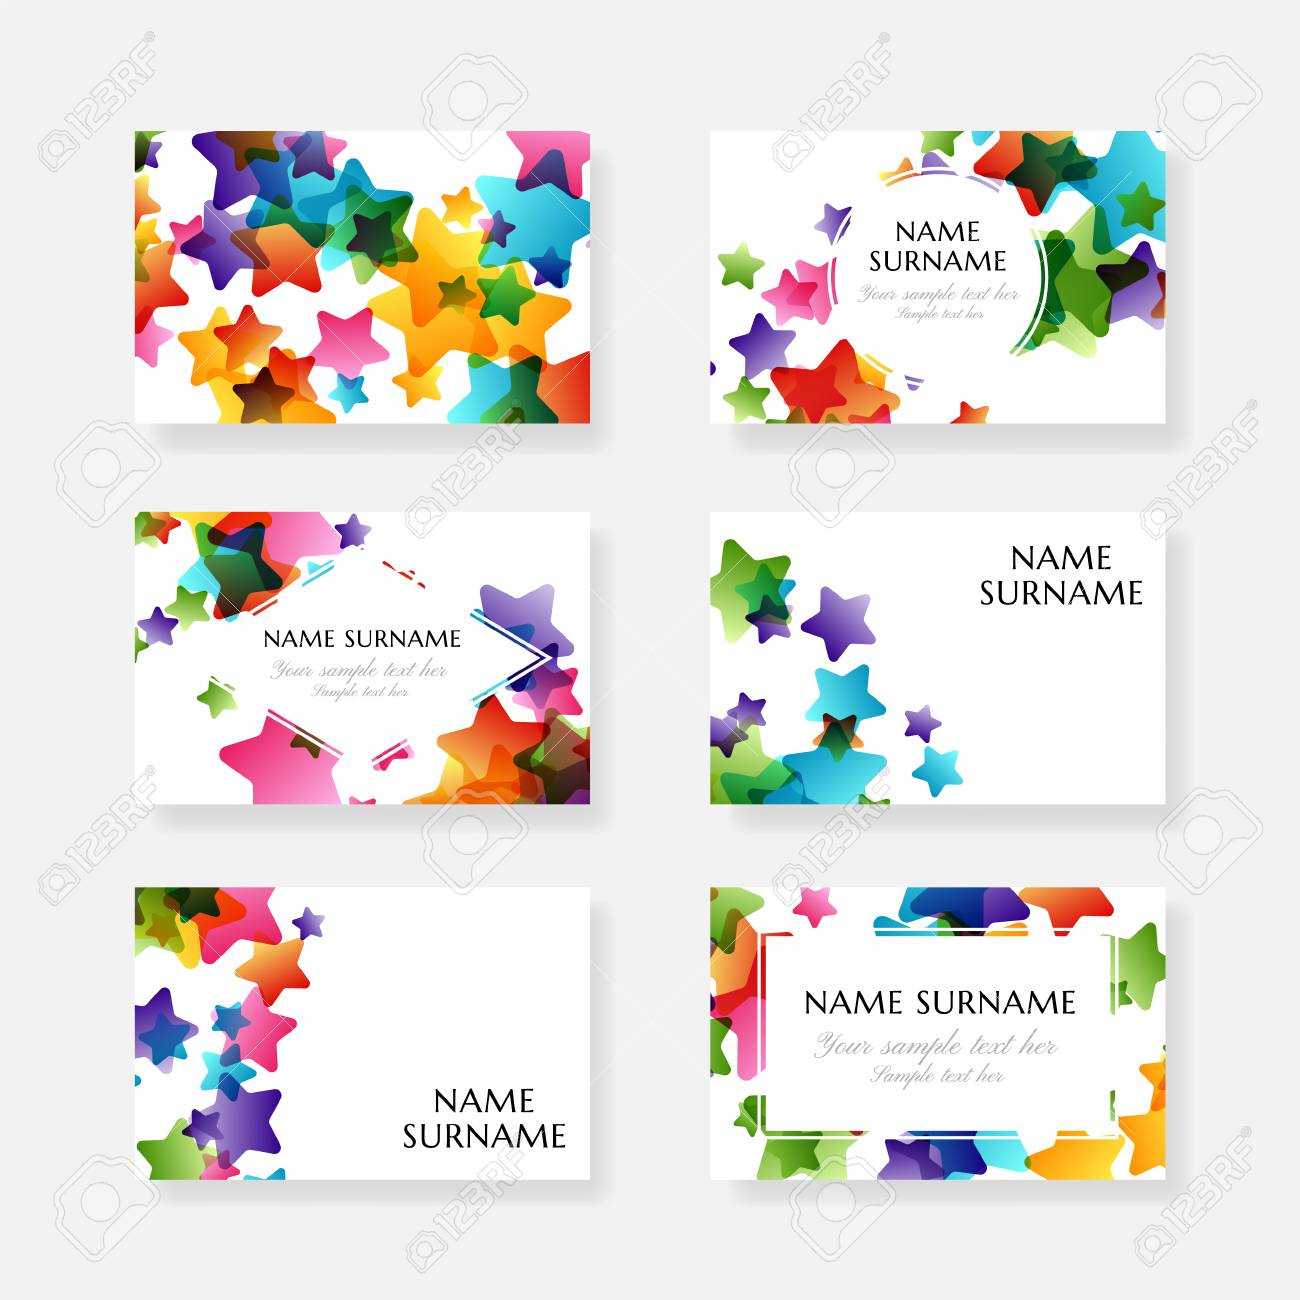 Creative Kids Design Collection. Vector Cards With Colorful Stars,.. Intended For Credit Card Template For Kids